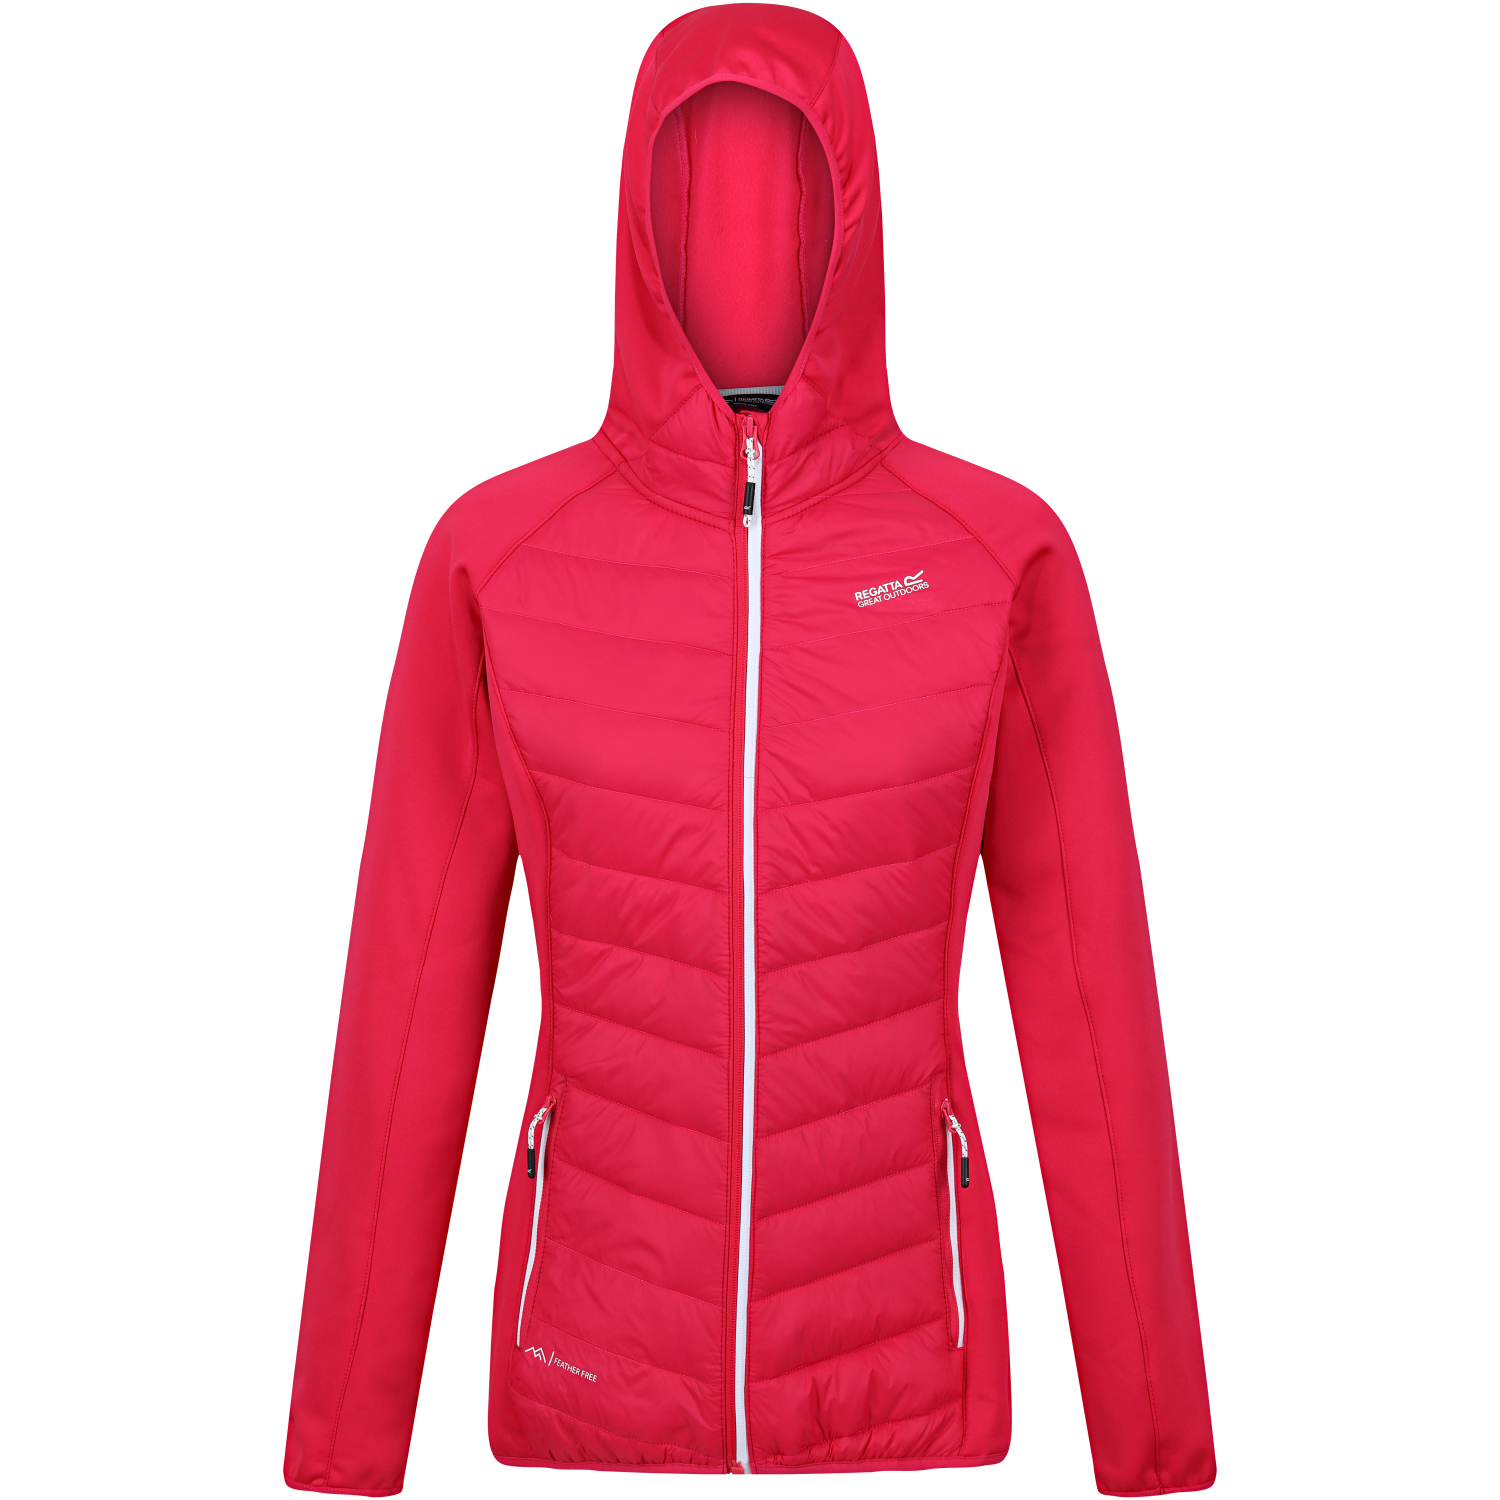 Regatta Womens Jacket Andreson VIII Hybrid (pink) at low prices